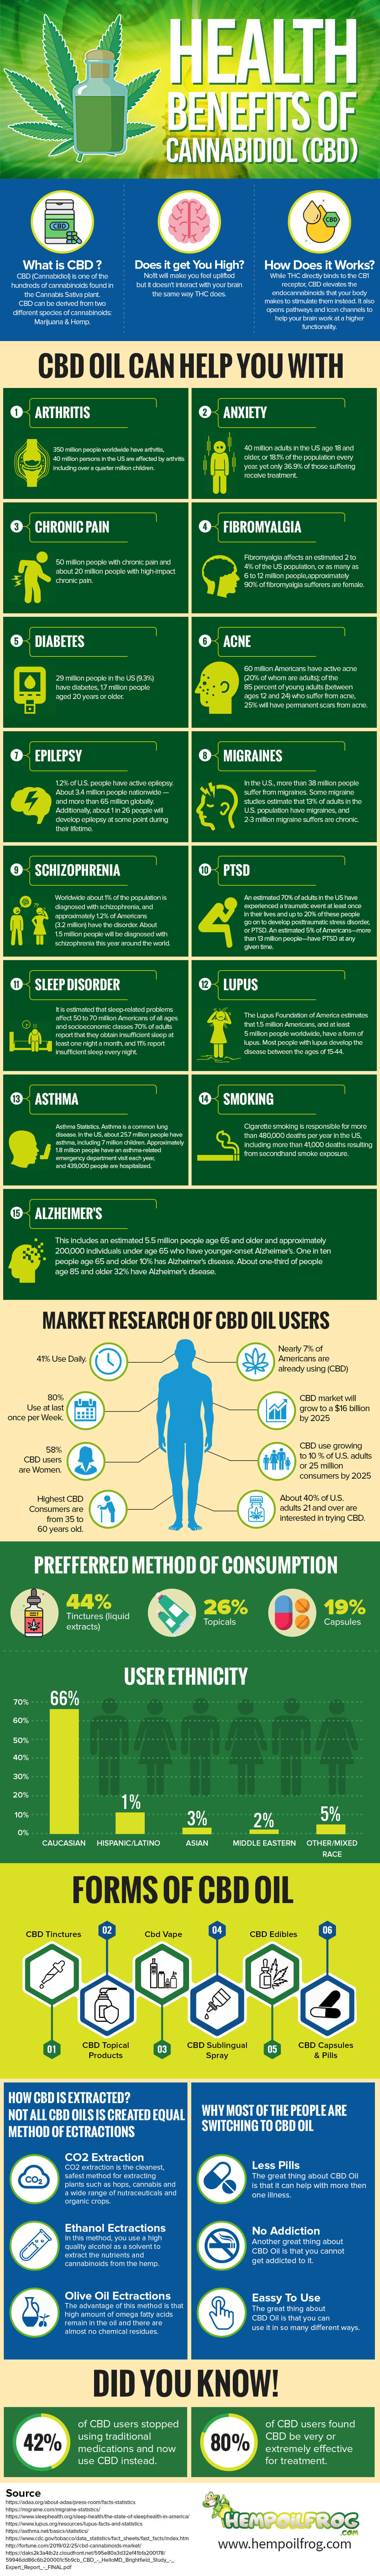 Healthy Benefits of CBD Oil [INFOGRAPHIC]